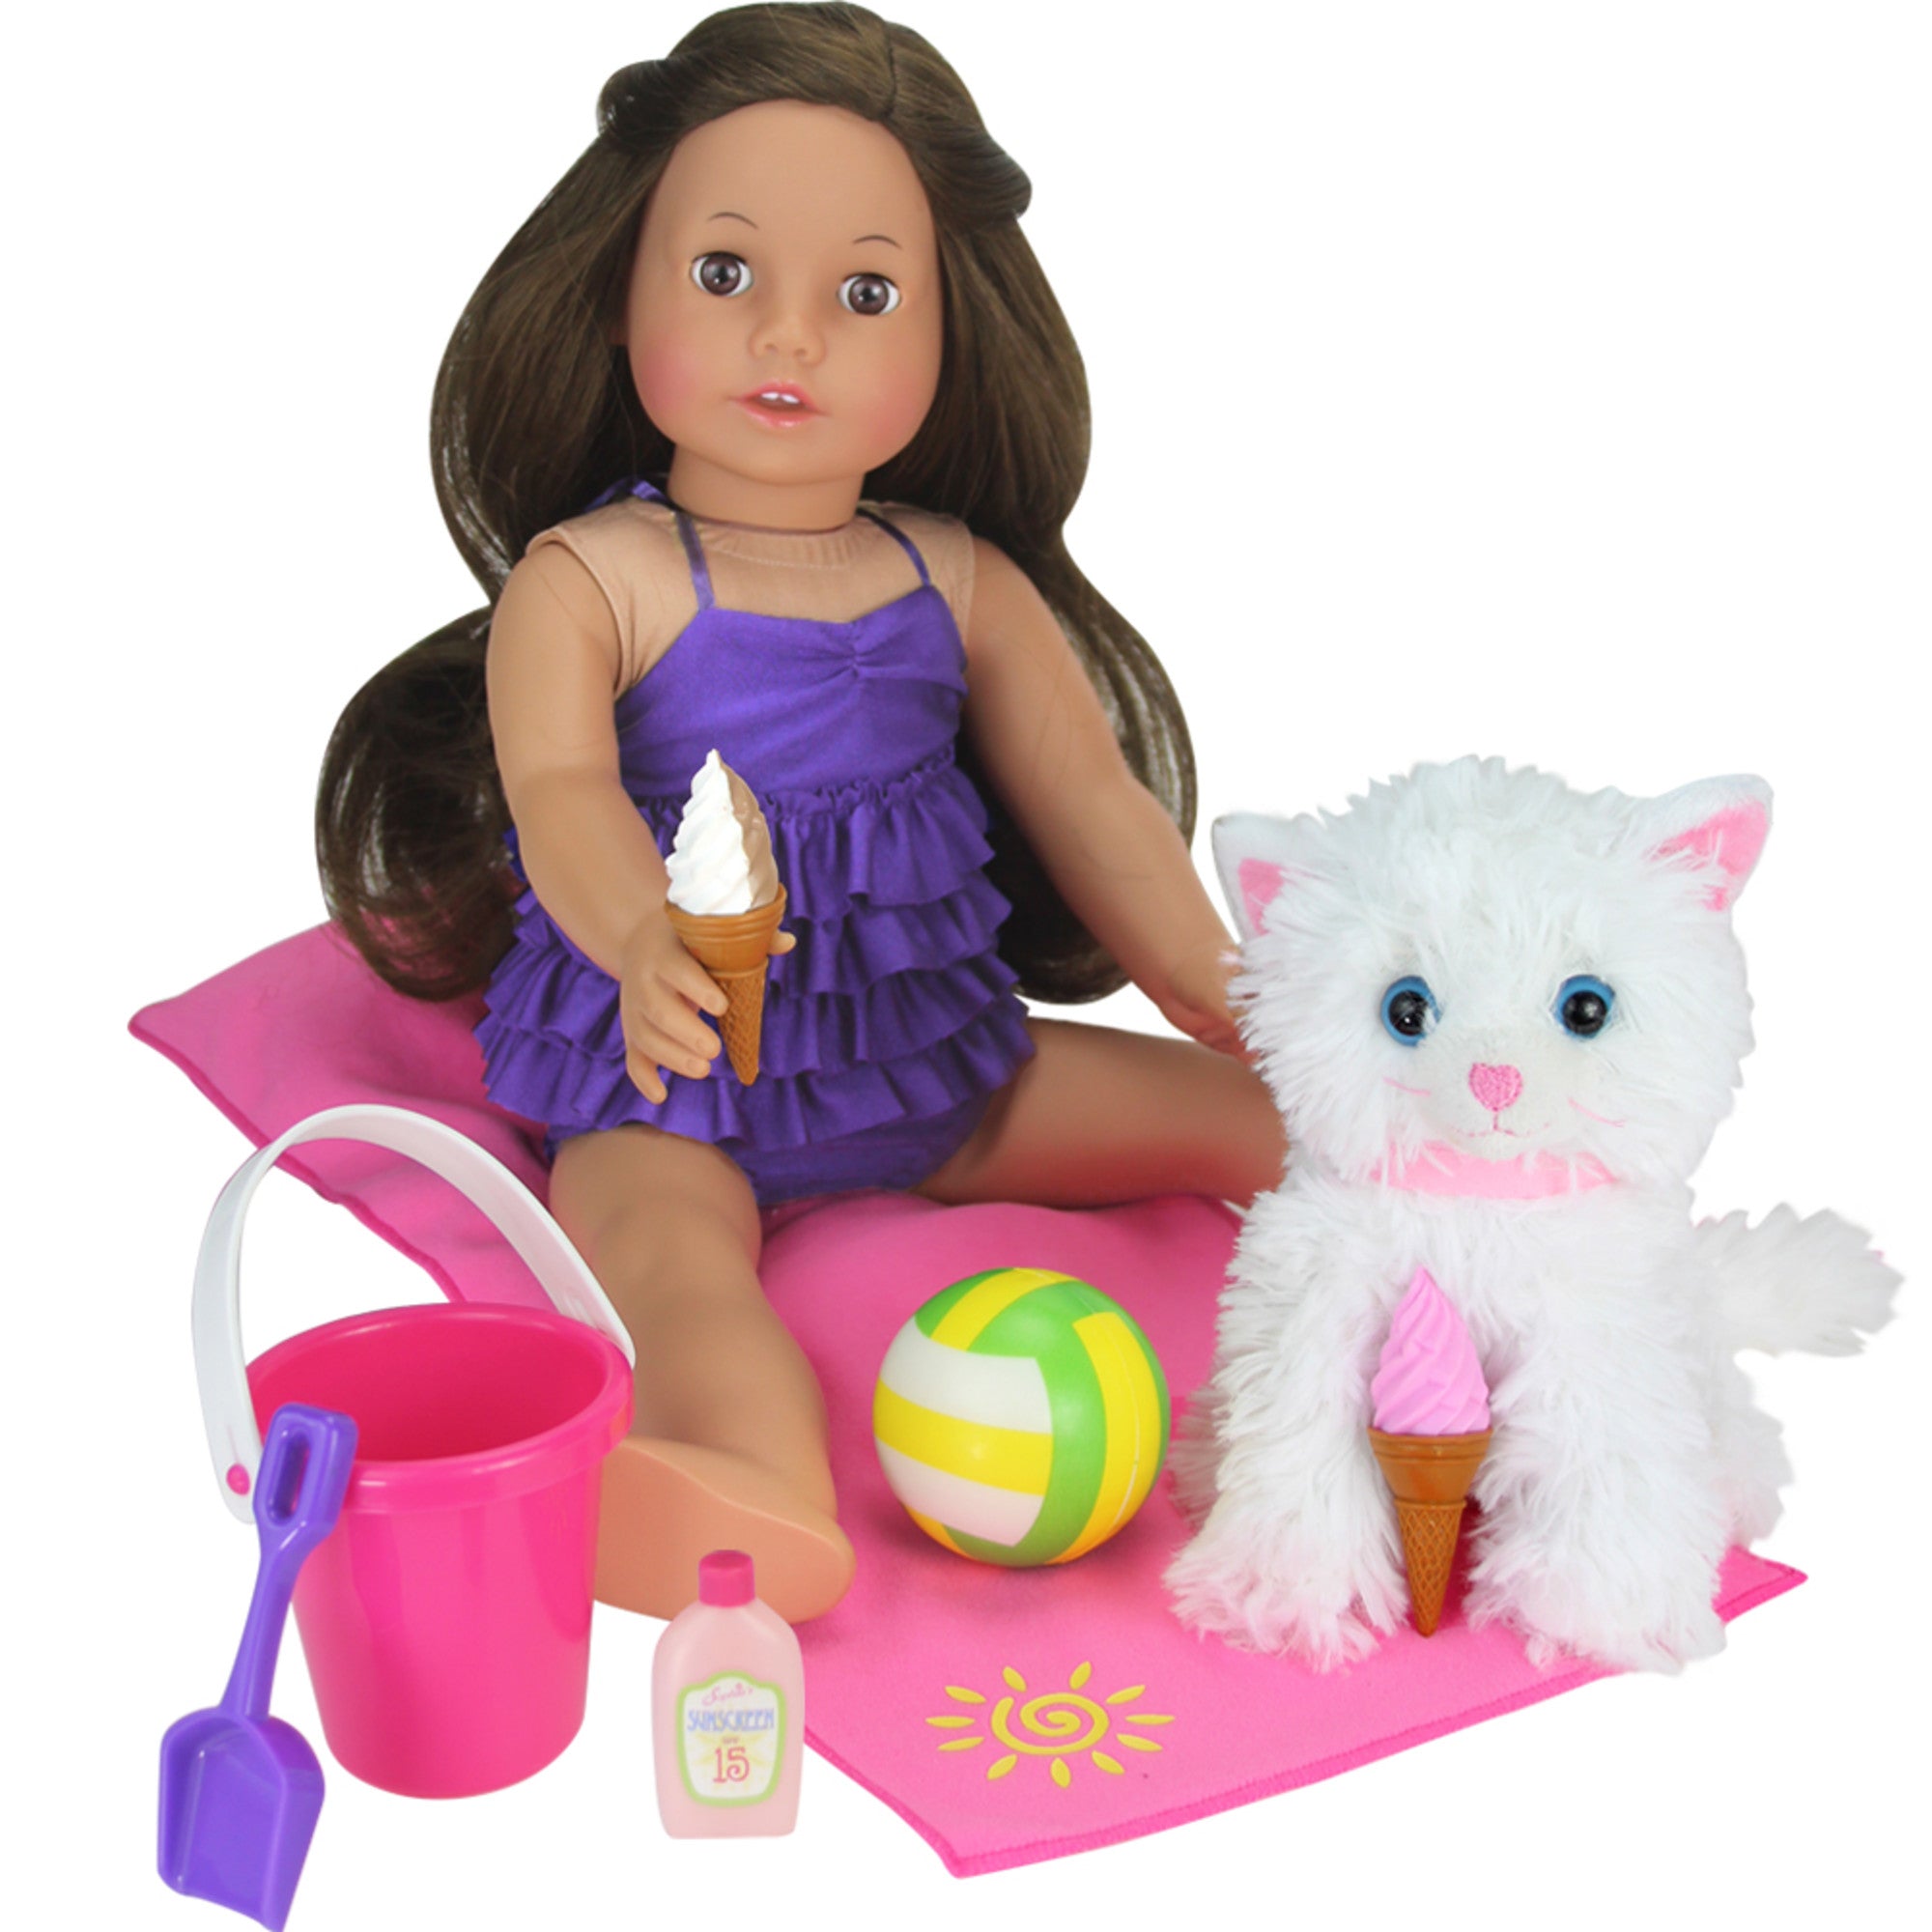 Sophia’s Complete Beach Day Play Set with Towel, Bucket, Shovel, Ball, Ice Cream Cones, Ice Cream Holder, & Pretend Sunscreen Bottle for 18” Dolls